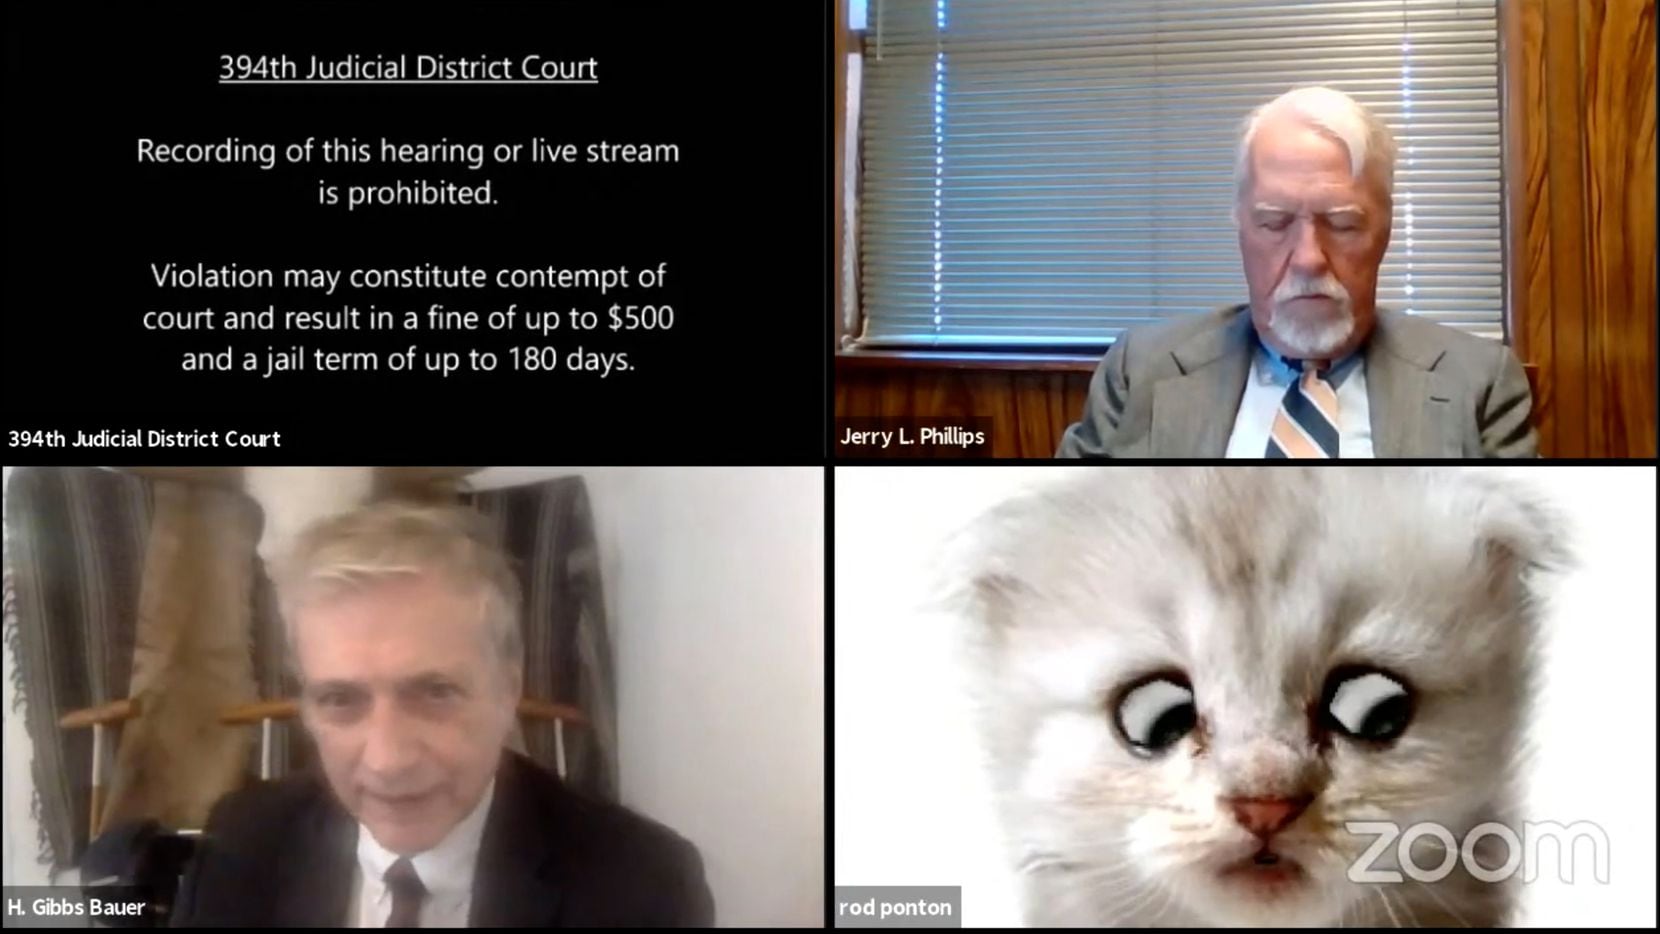 The best-known Texas virtual court hearing happened in February when a lawyer appeared as a cat due to what was called "a filter mishap." But that was only one of 1.5 million virtual hearings in Texas that have revolutionized the Texas judiciary.